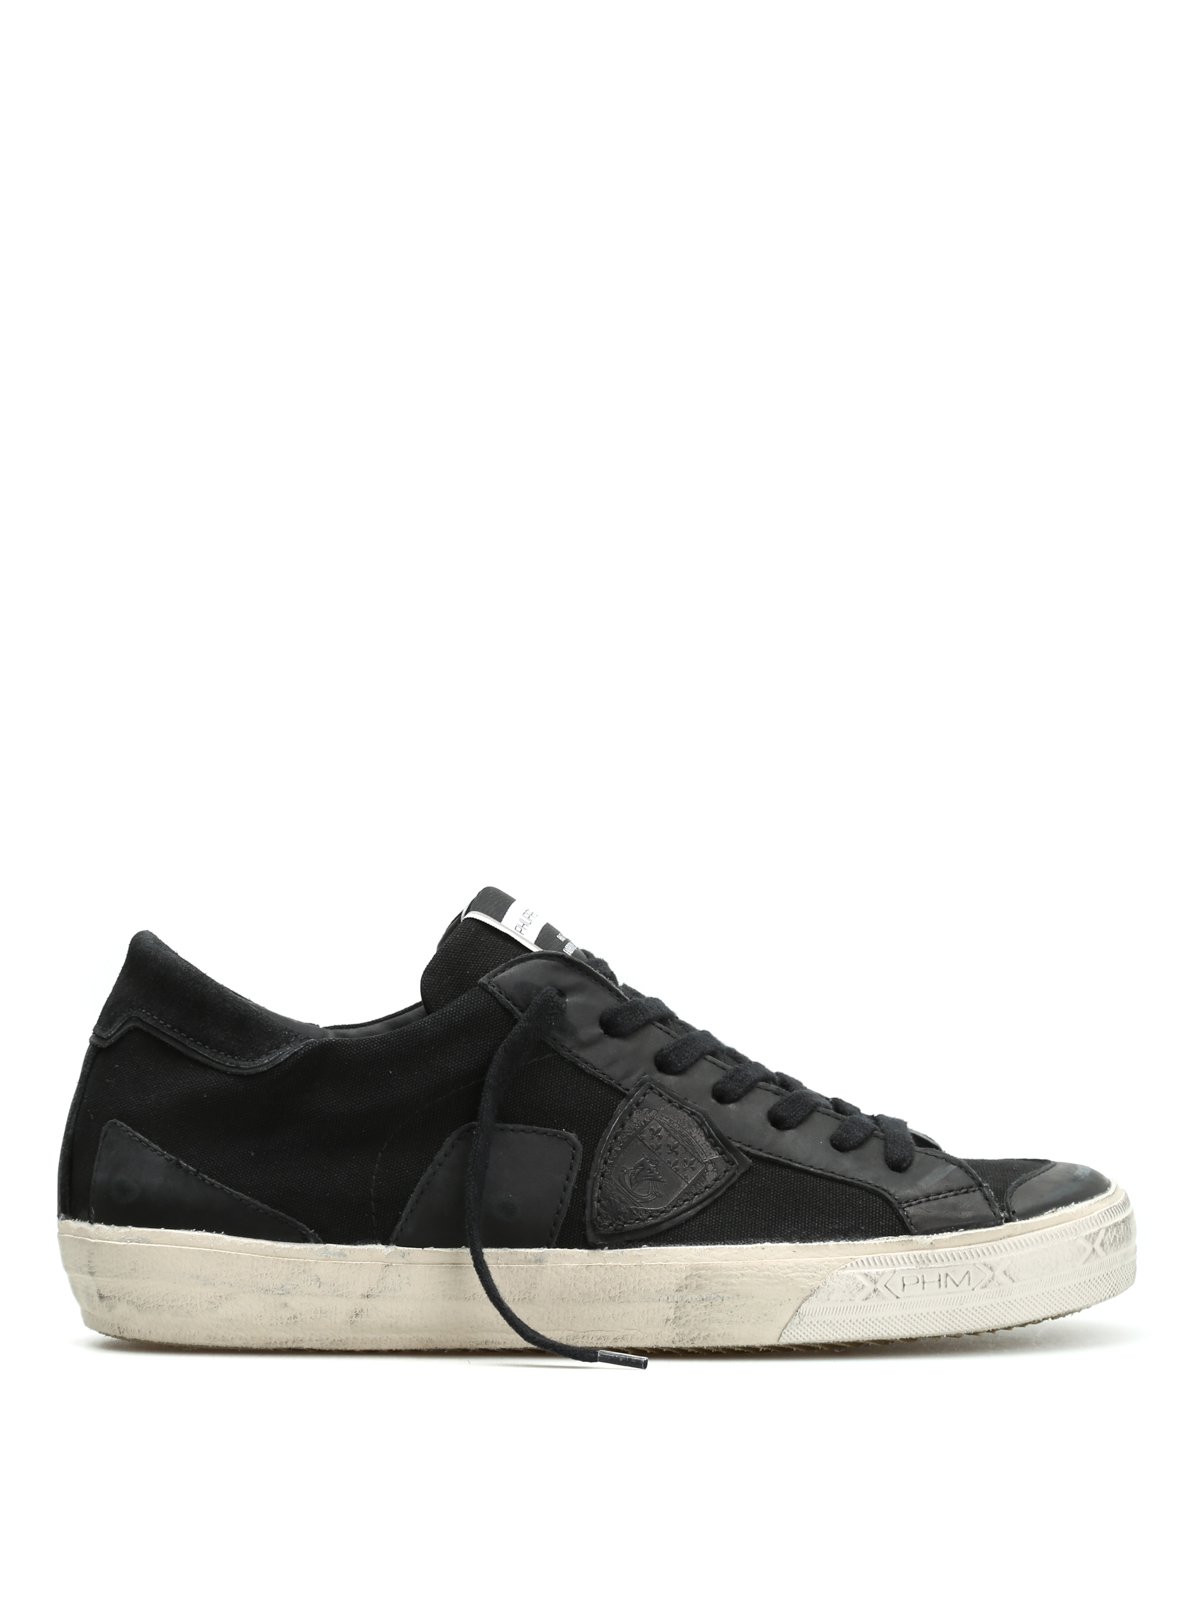 Trainers Philippe Model - Bercy canvas sneakers - BELUCW04 | iKRIX.com